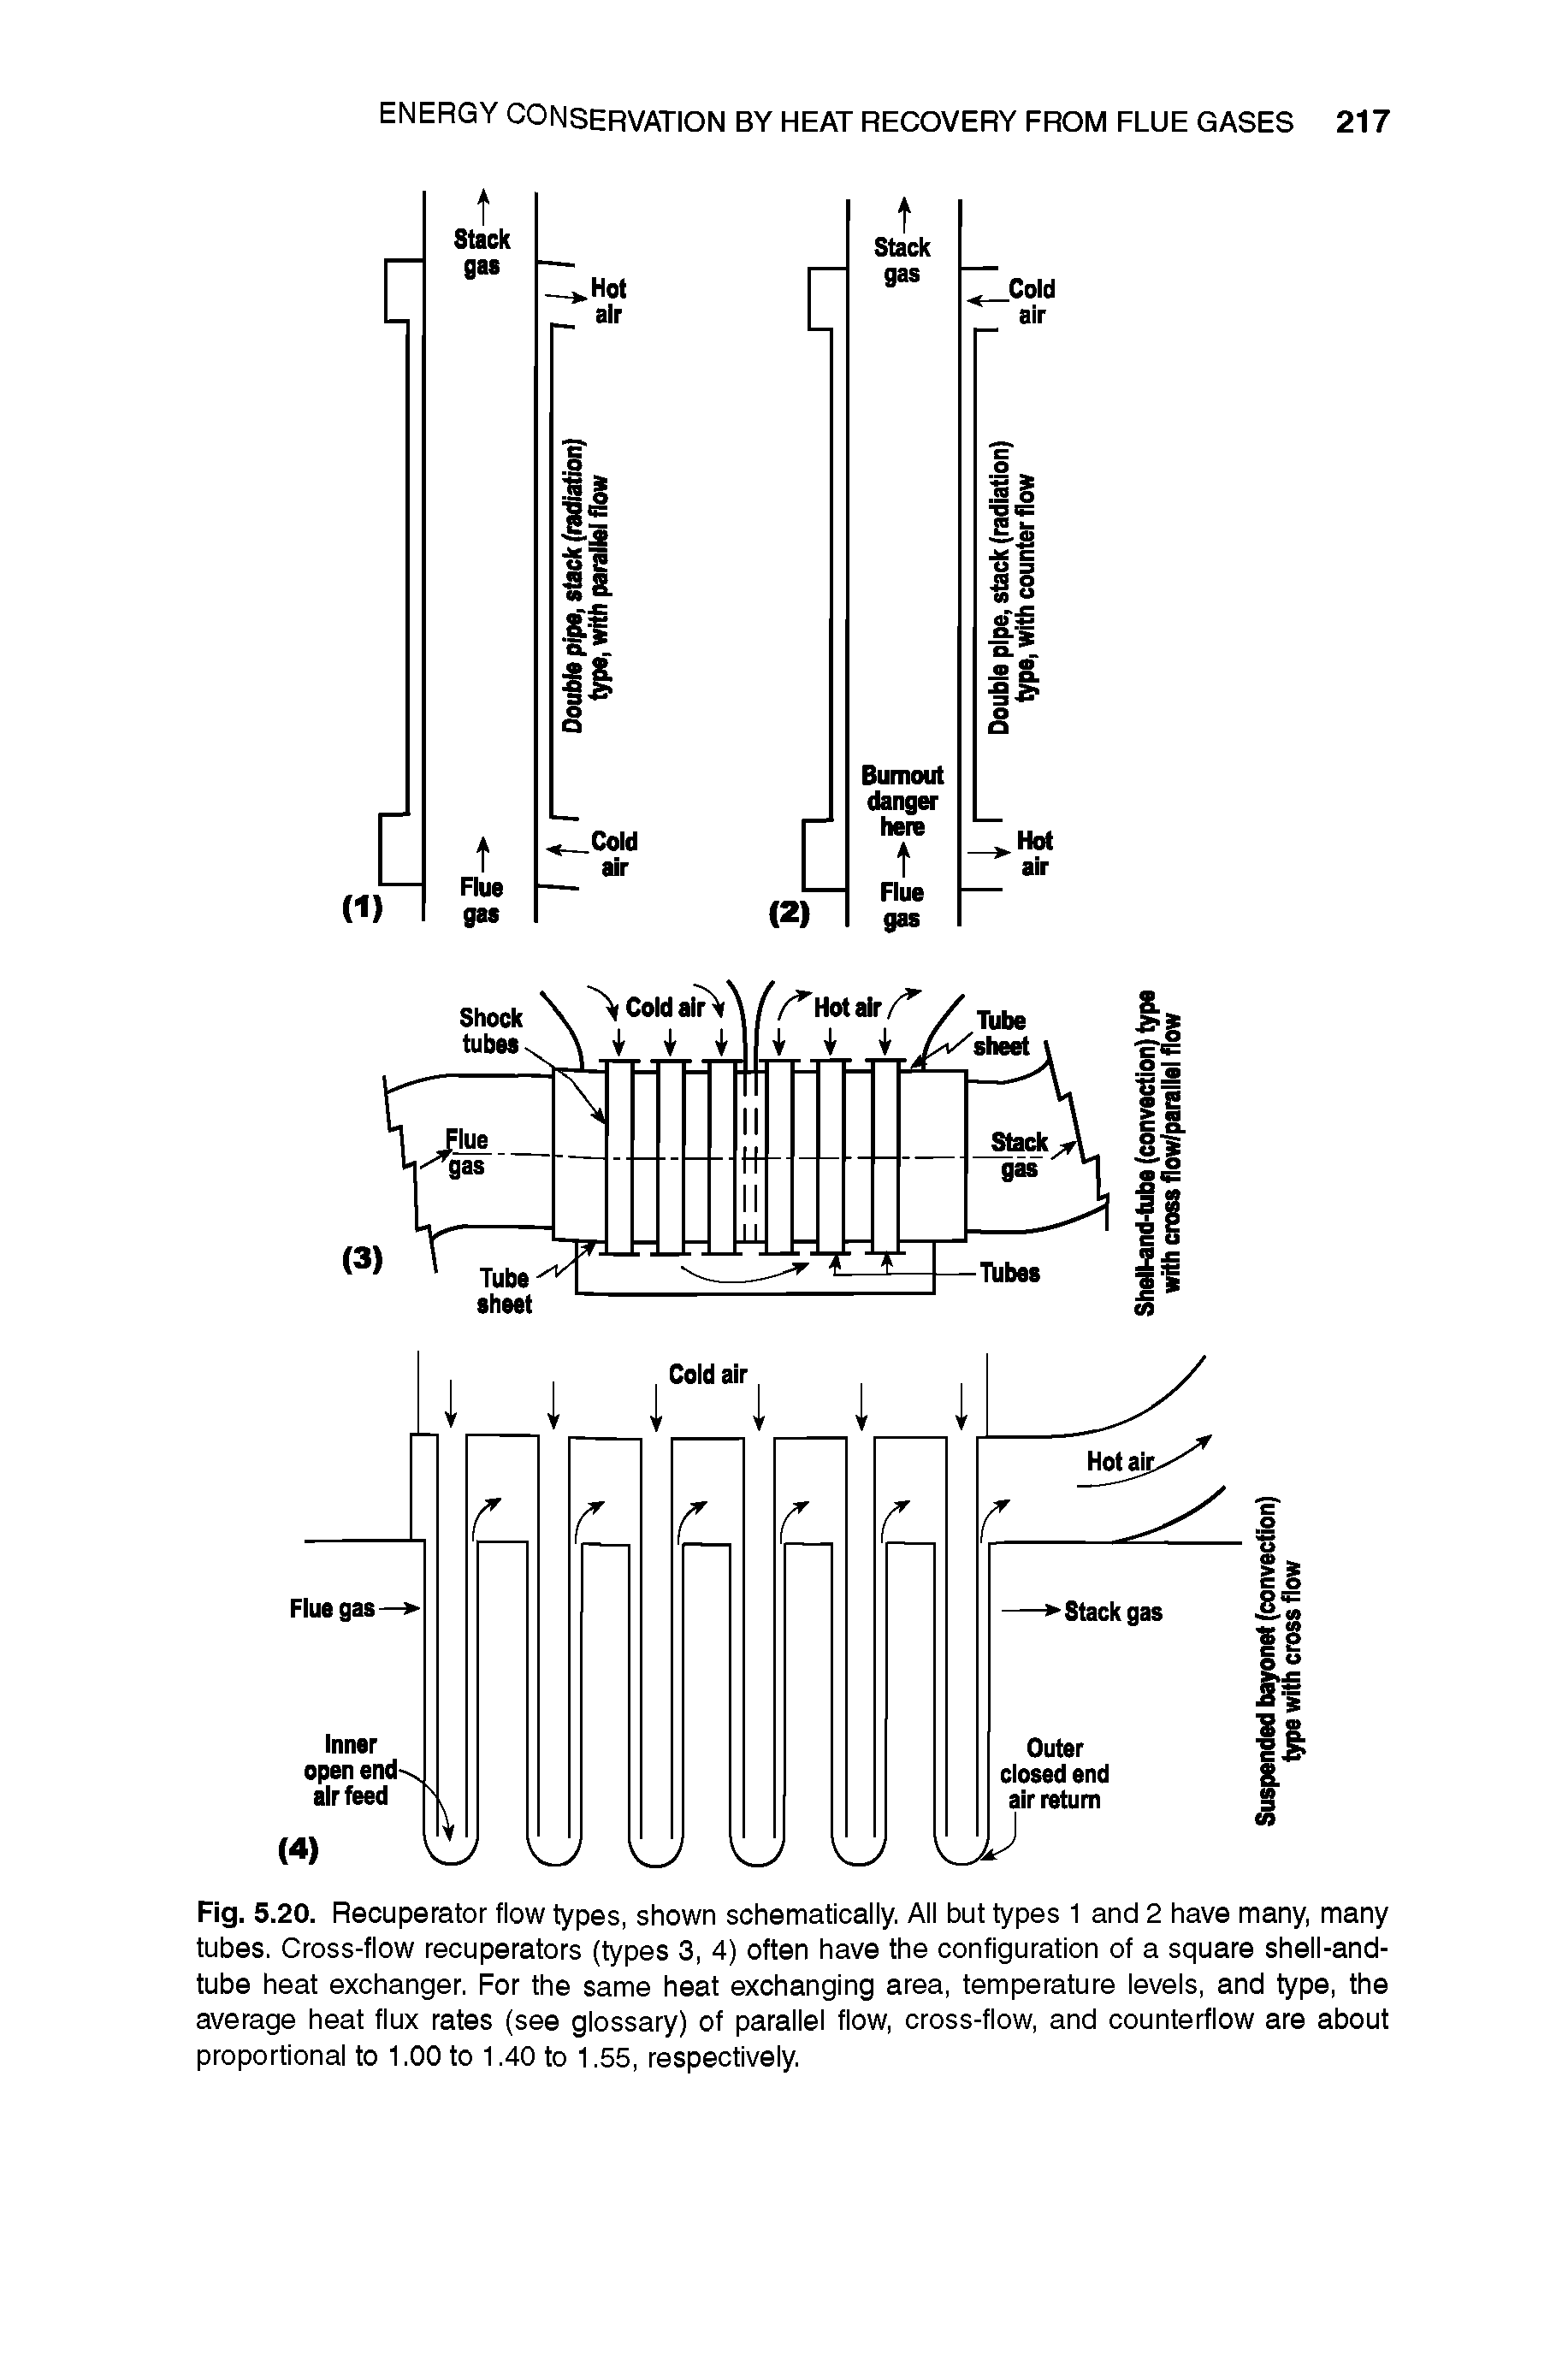 Fig. 5.20. Recuperator flow types, shown schematically. All but types 1 and 2 have many, many tubes. Cross-flow recuperators (types 3, 4) often have the configuration of a square shell-and-tube heat exchanger. For the same heat exchanging area, temperature levels, and type, the average heat flux rates (see glossary) of parallel flow, cross-flow, and counterflow are about proportional to 1.00 to 1.40 to 1.55, respectively.